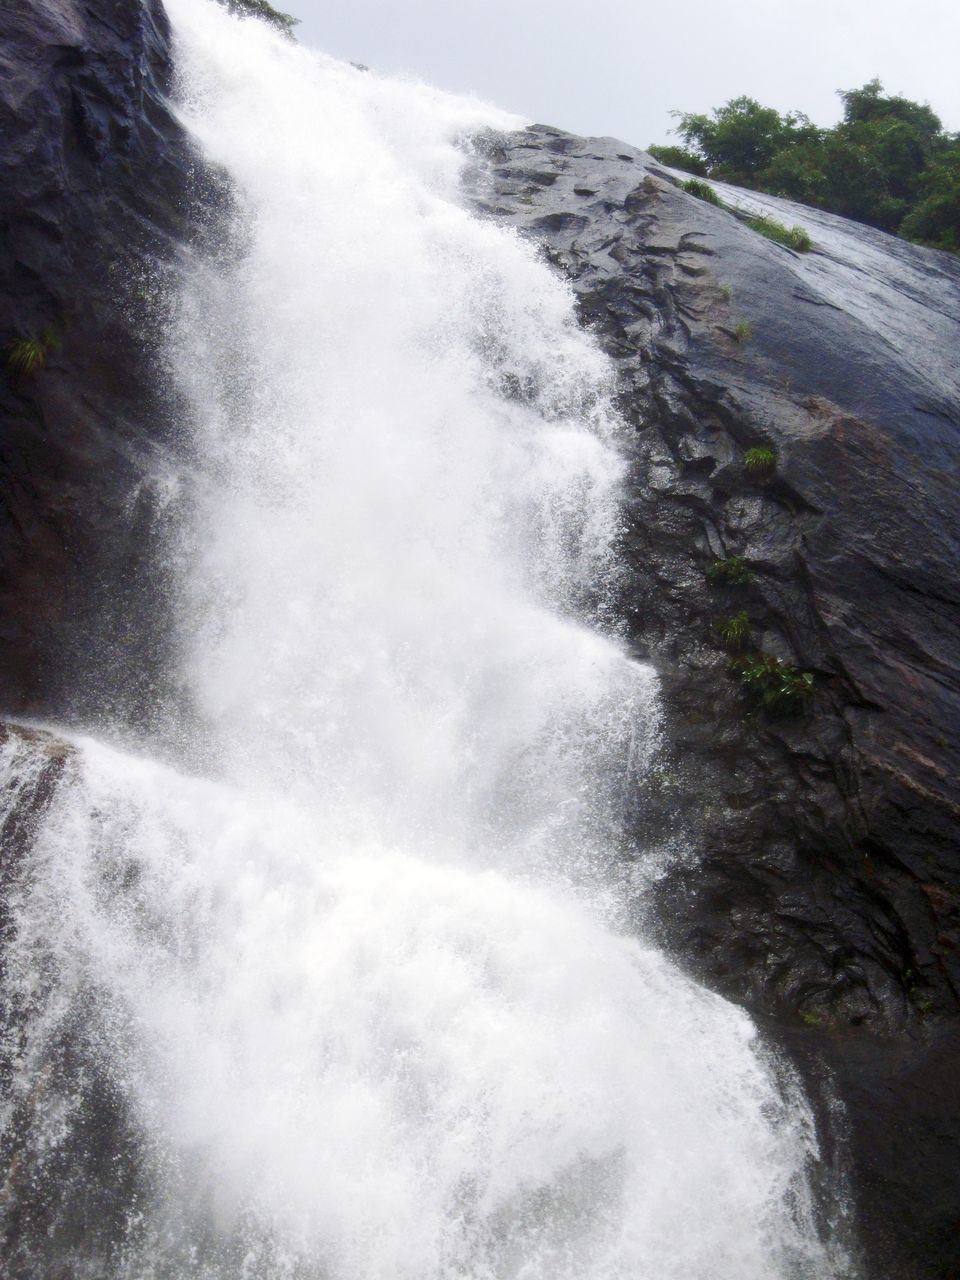 CLOSE-UP OF WATERFALL AGAINST SKY